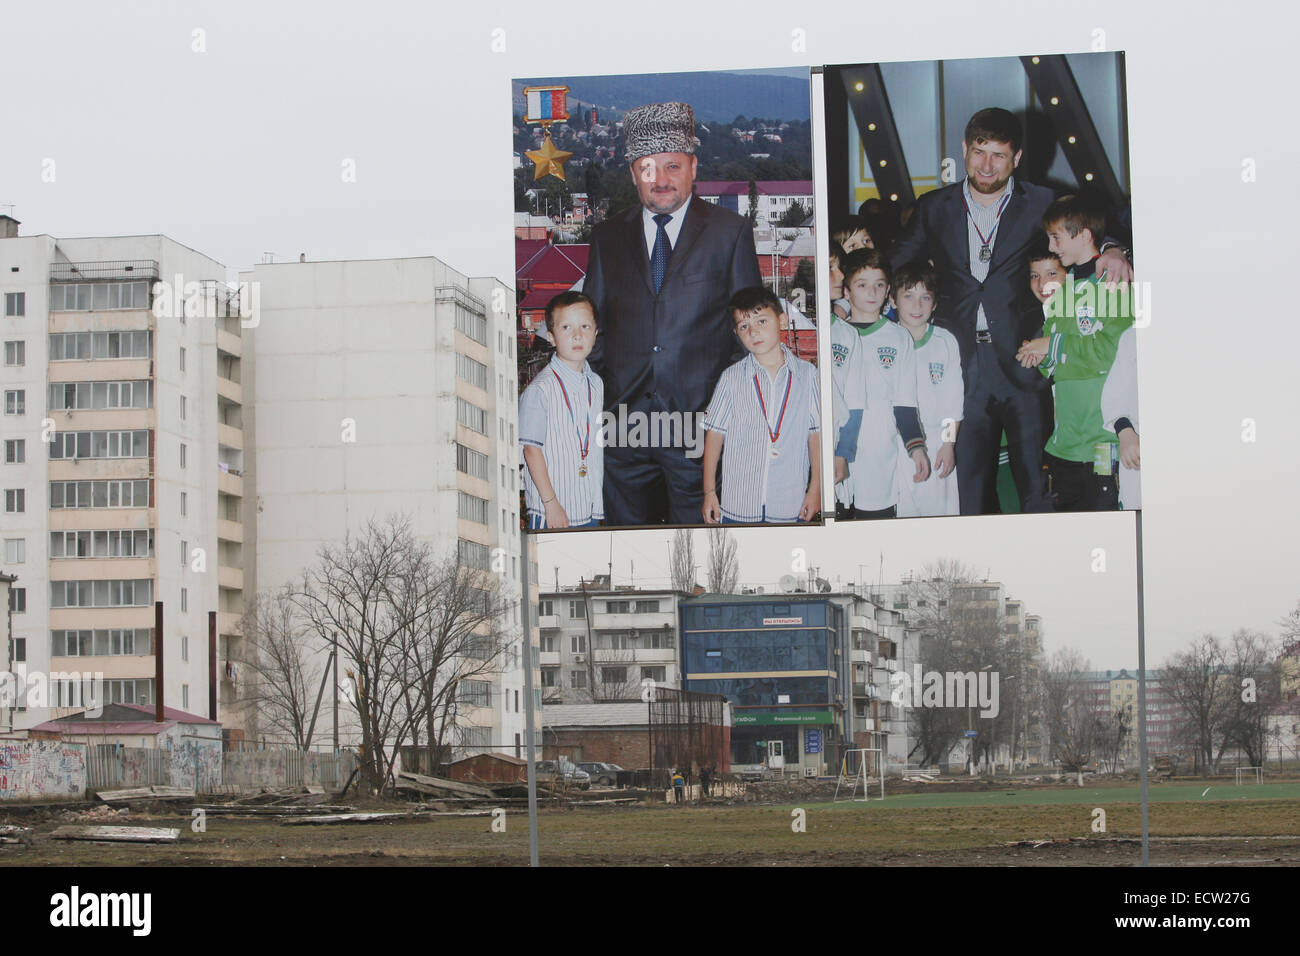 Billboard showing the former Chechen president Achmat Kadyrov and his son, the current president Ramzan Kadyrov, at the Ramzan Football Academy in the Chechen capital Grozny, Russia Stock Photo